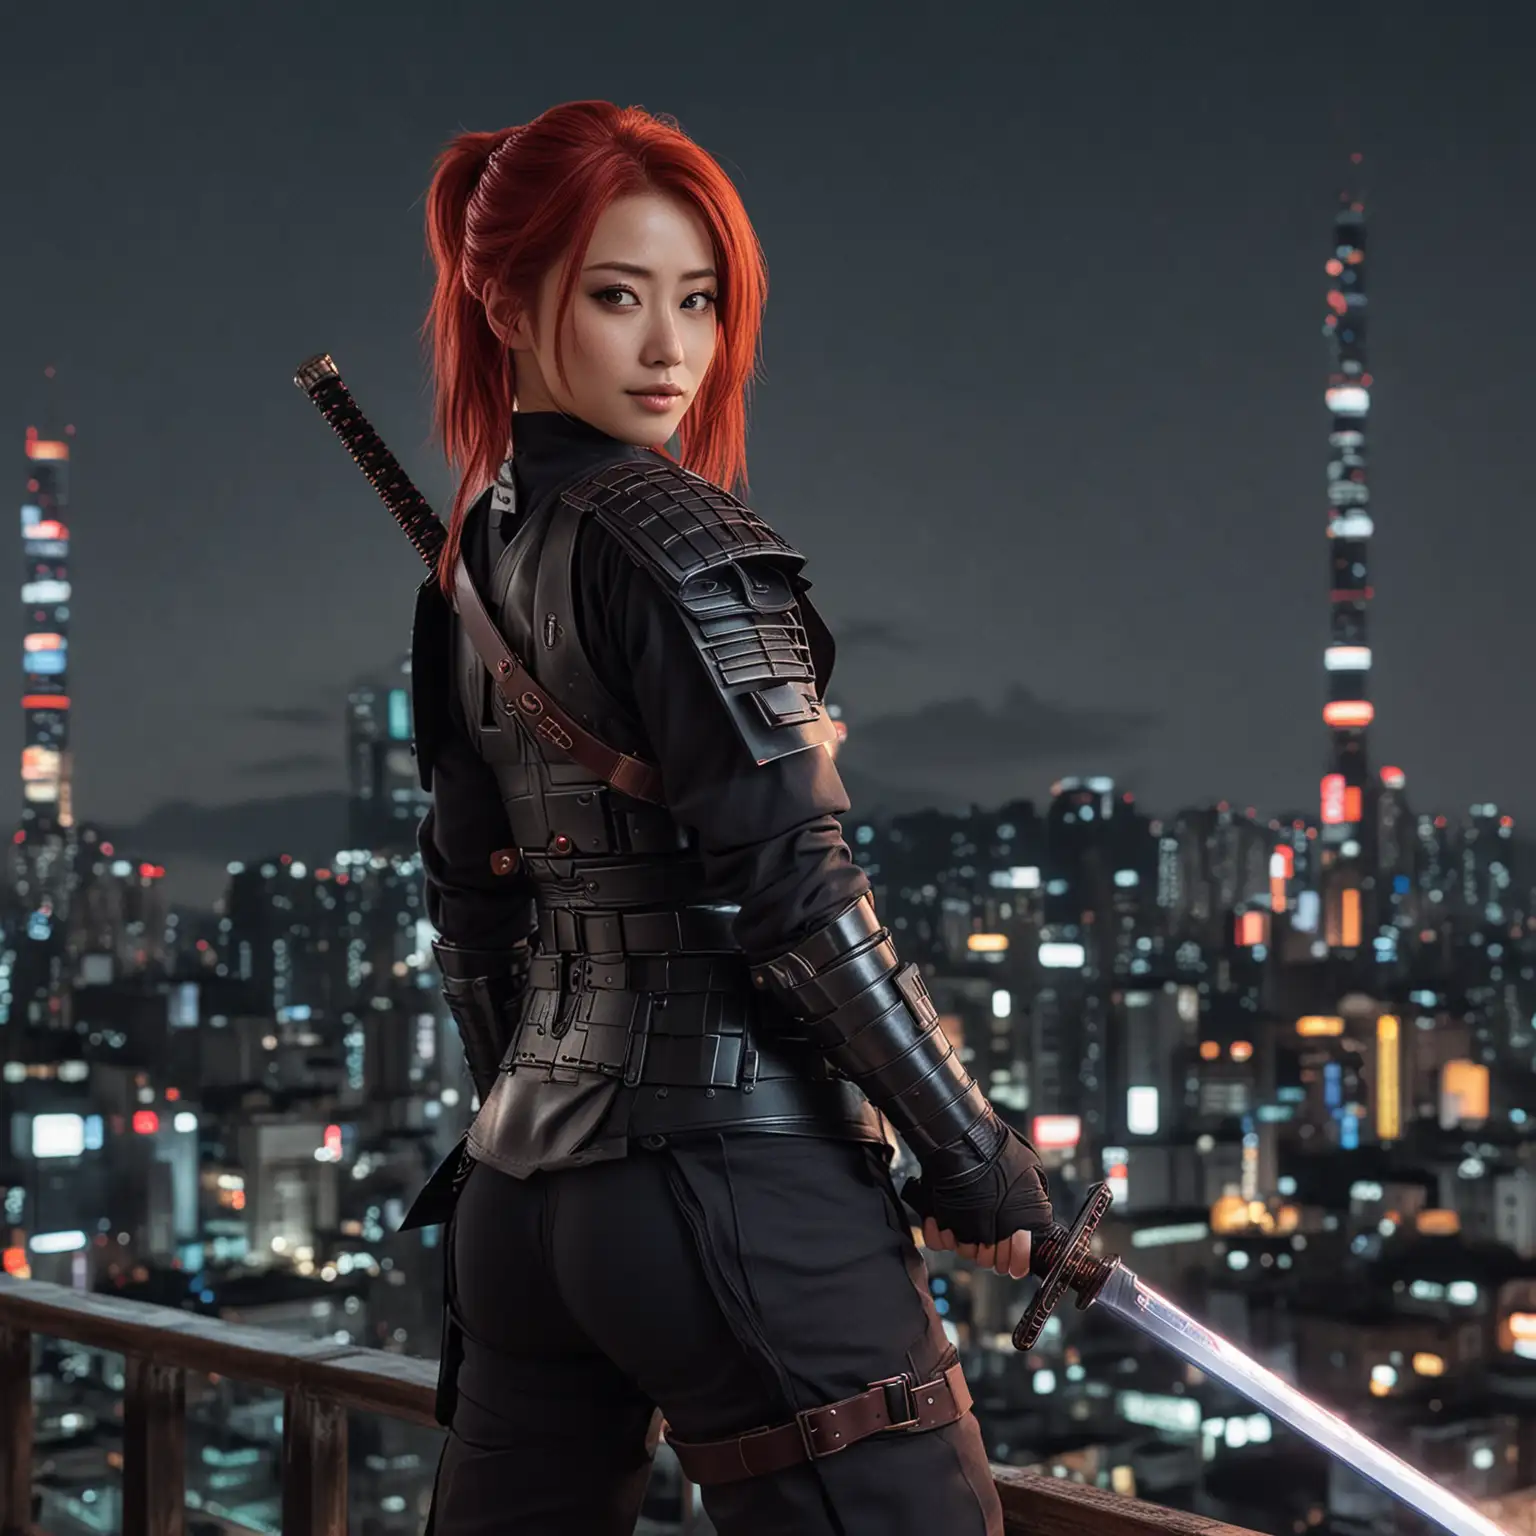 A 42 years old Bae Doon as a futuristic swordswoman . She is on a rooftop looking over futuristic neo Kyoto at night. She has red hair, looks confident, large eyes with a smile